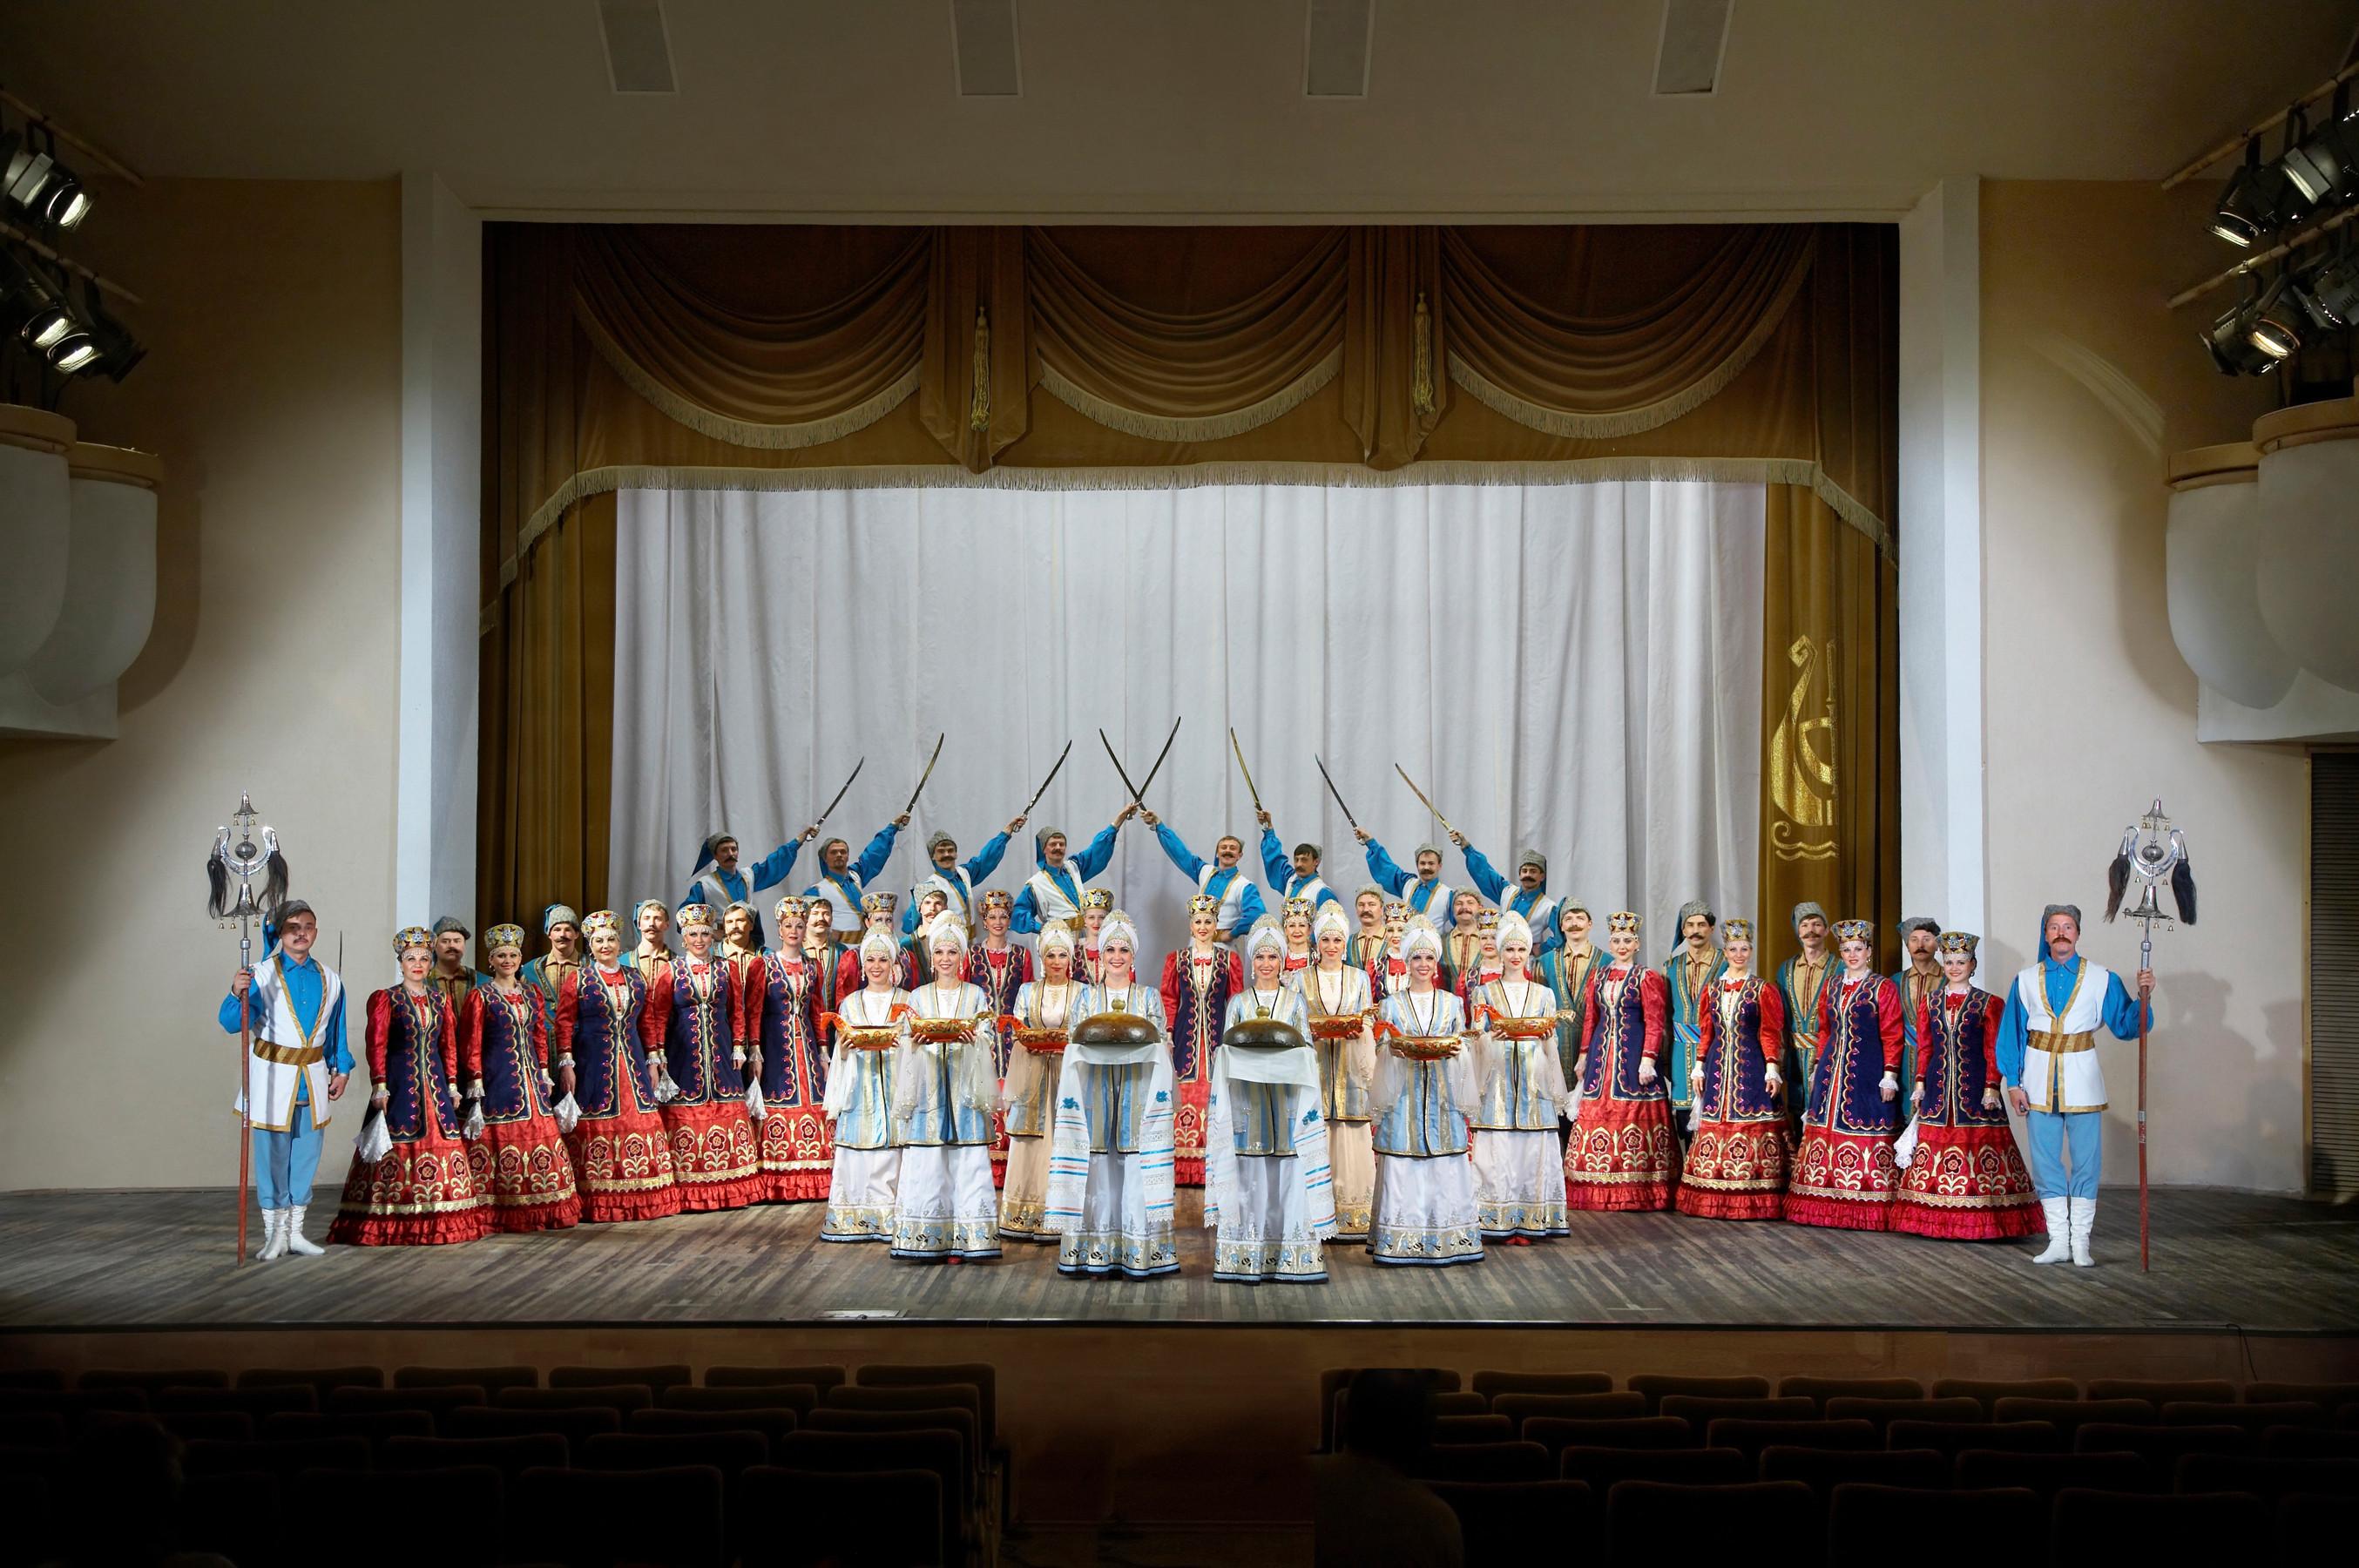 The Leisure and Cultural Services Department will present two brilliant performances by the Don Cossacks State Academic Song and Dance Ensemble in honour of Anatoly Kvasov in late May. Photo shows a scene from past performance by the Don Cossacks State Academic Song and Dance Ensemble in honour of Anatoly Kvasov.